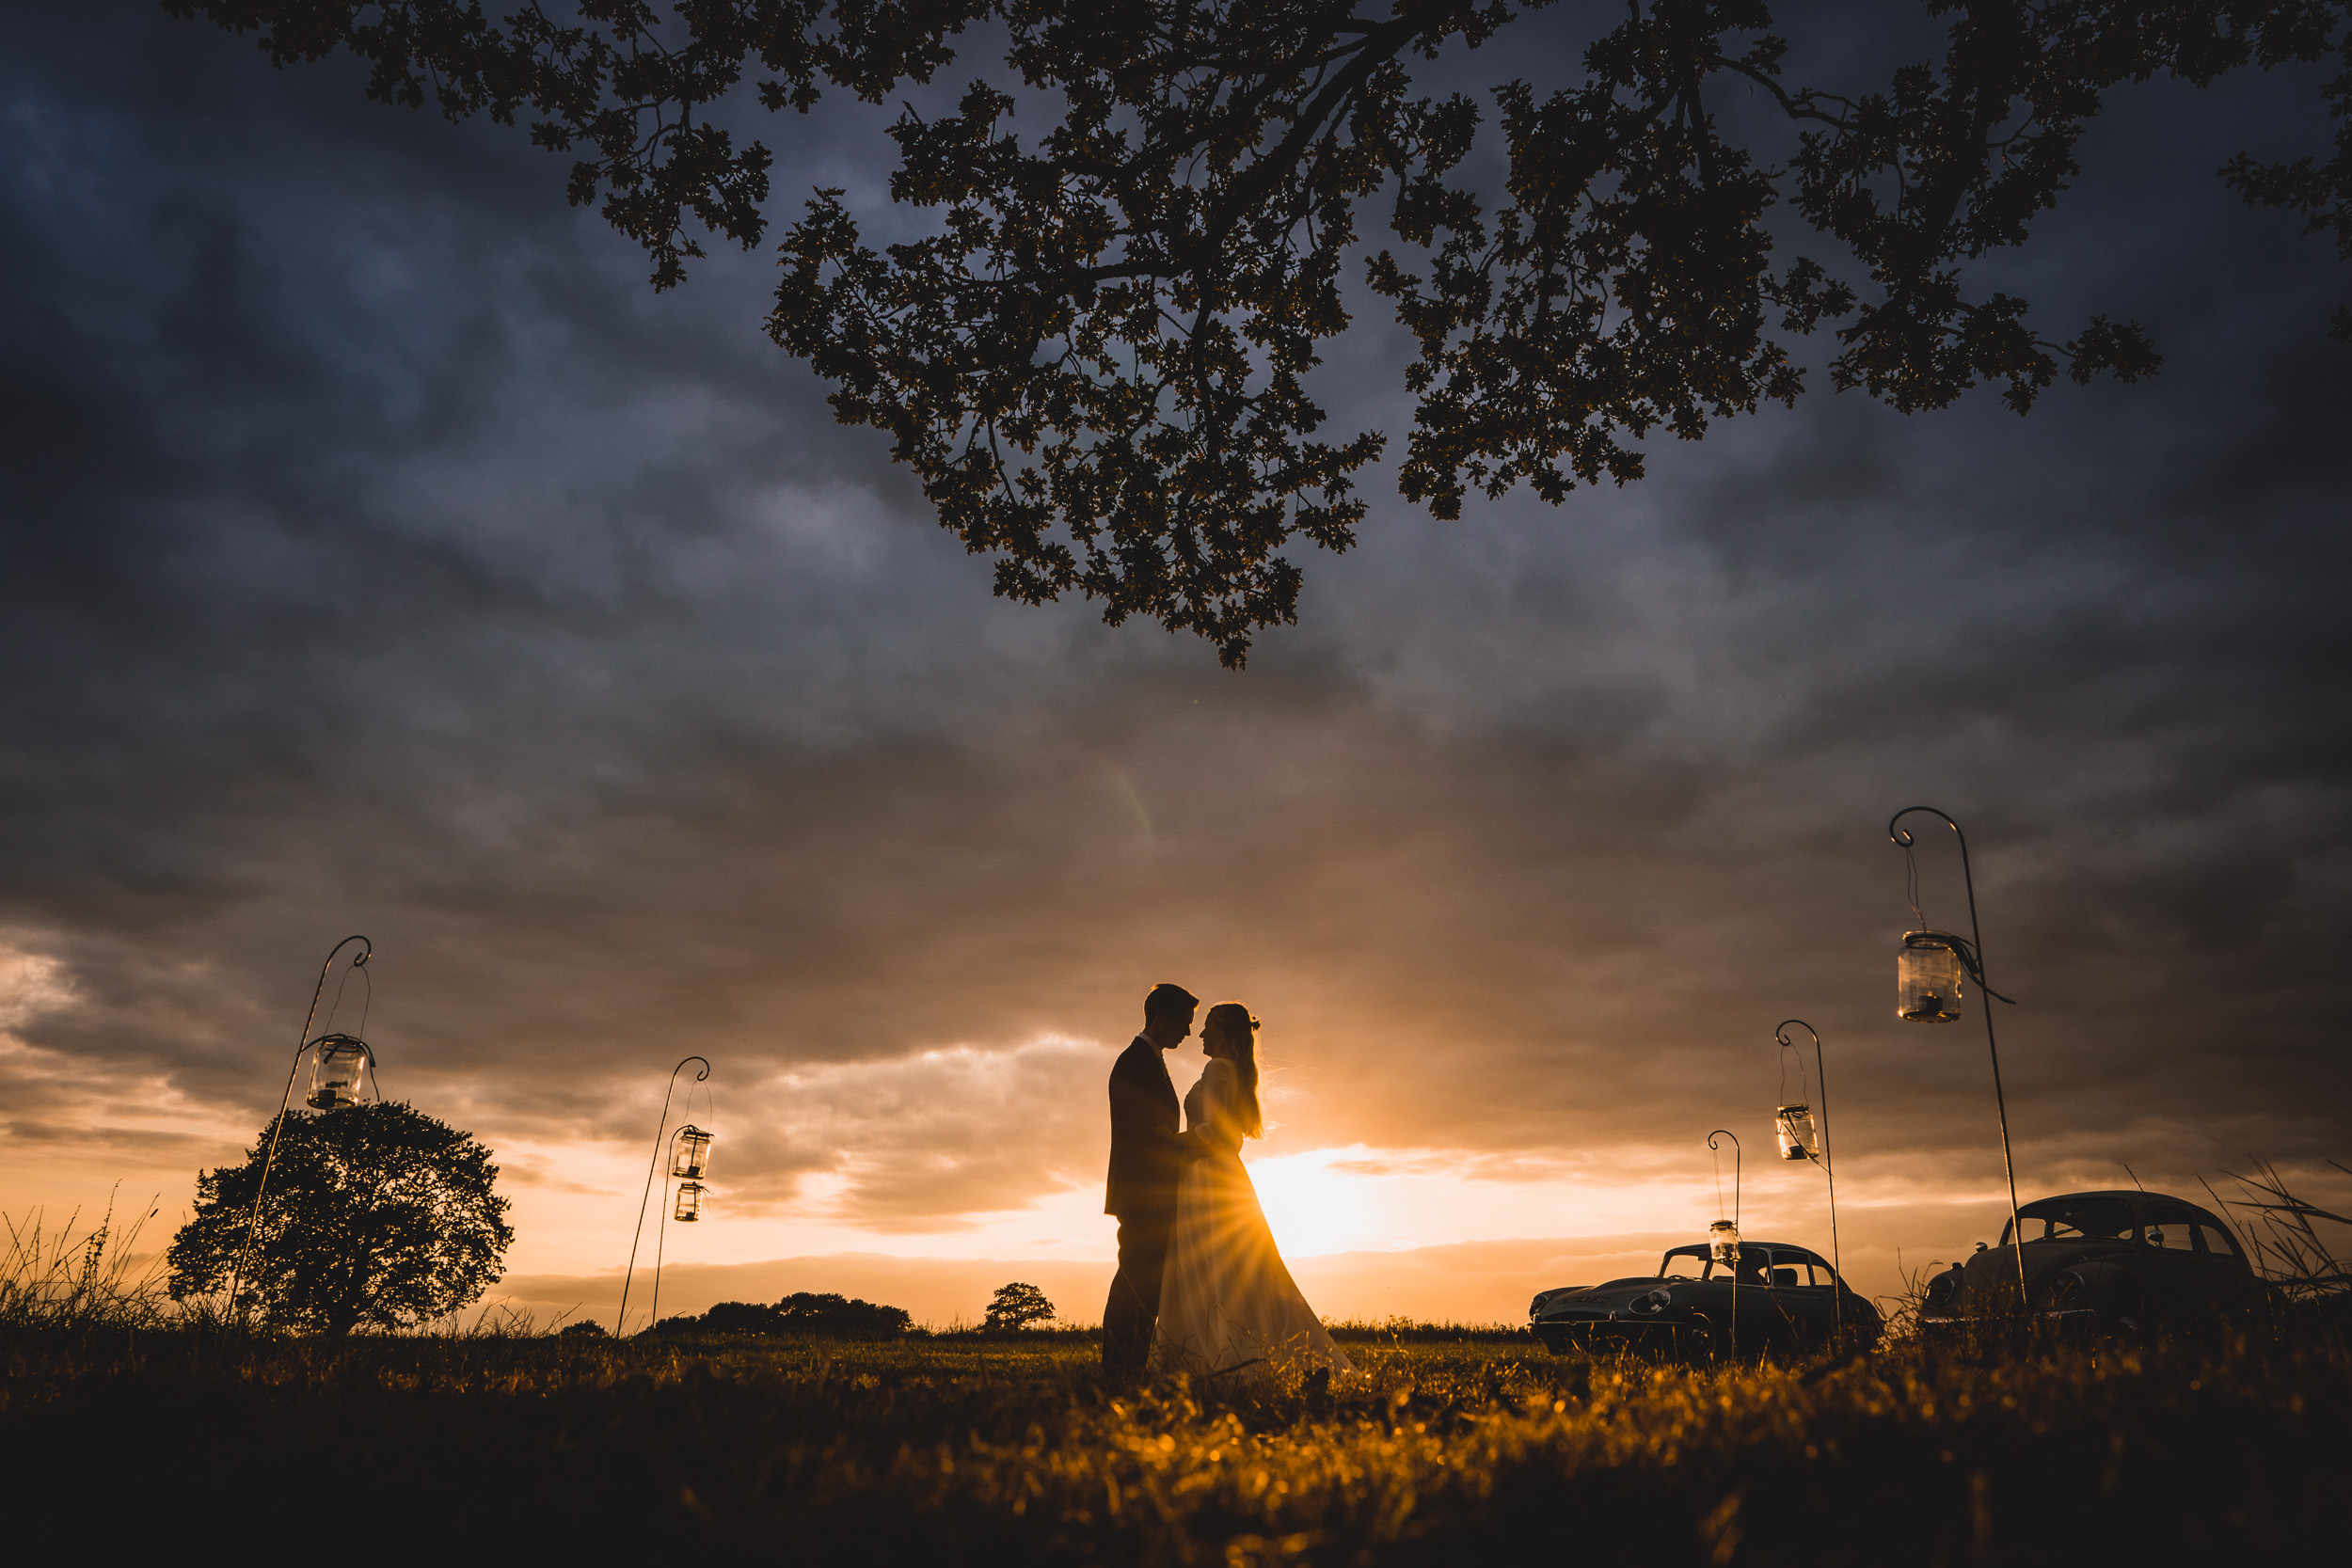 A bride and groom captured by a wedding photographer under a cloudy sky at sunset.